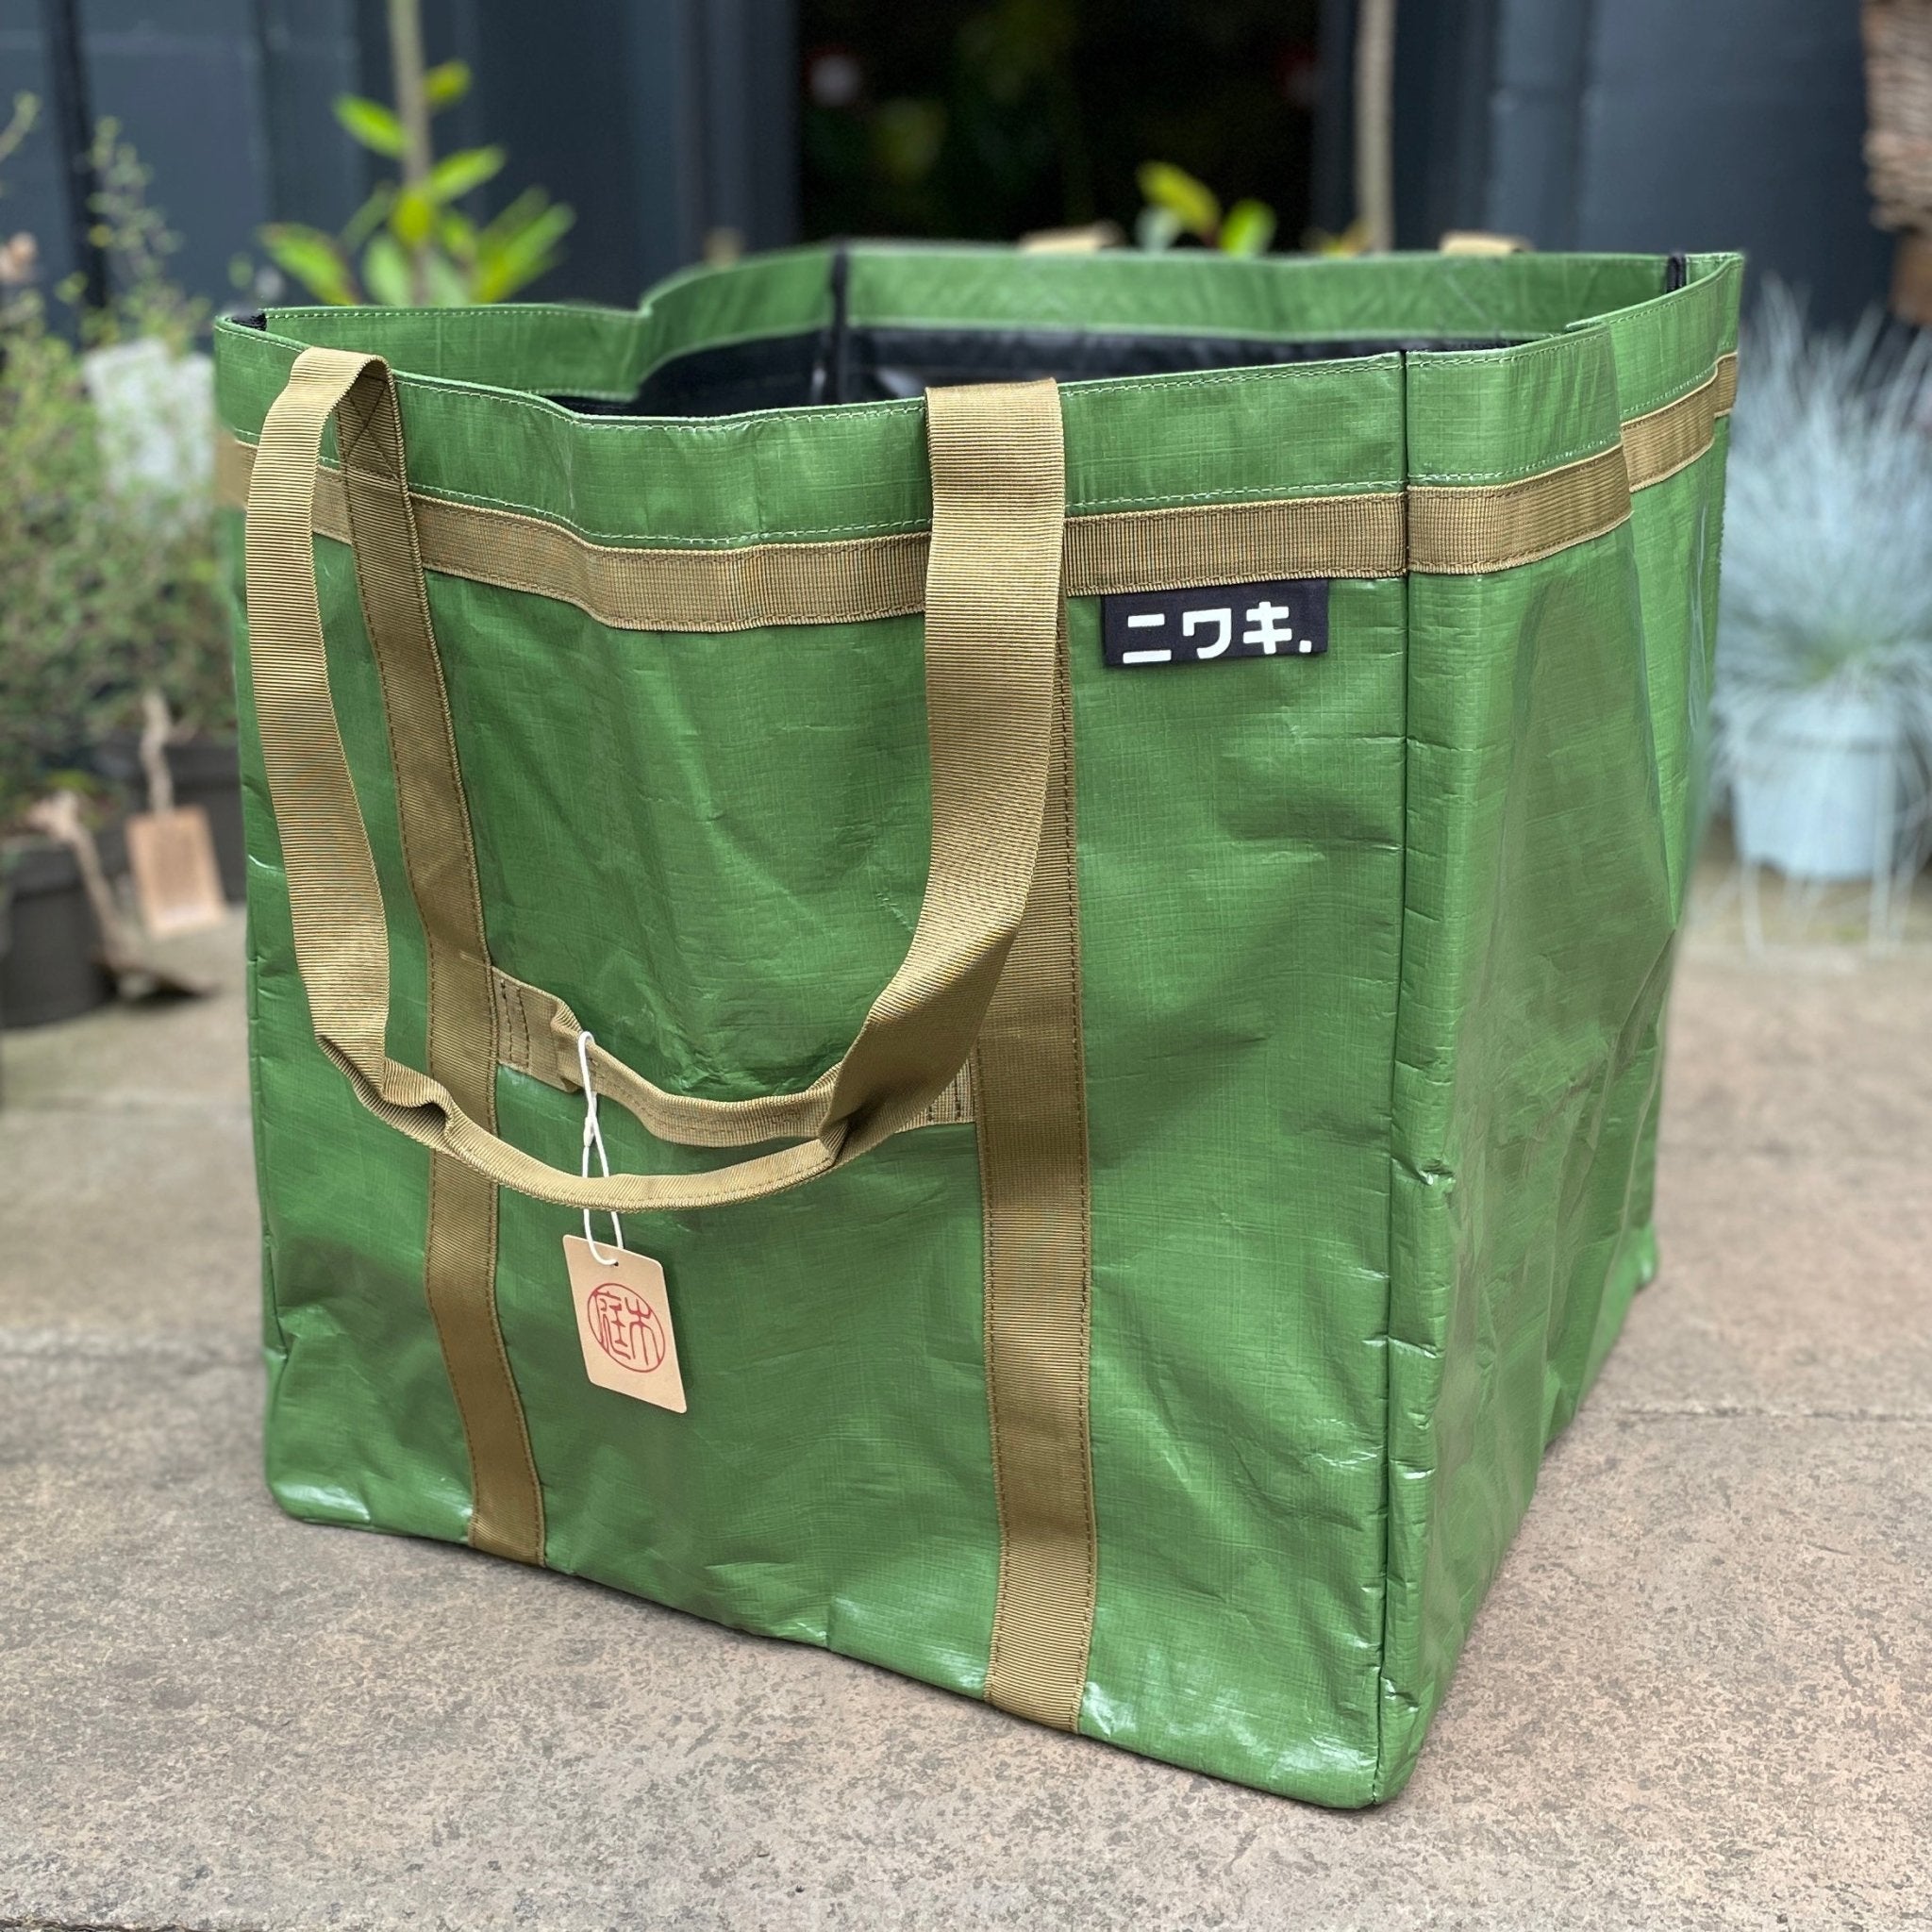 Niwaki Leaf Bag - For moving garden waste, plants and much more